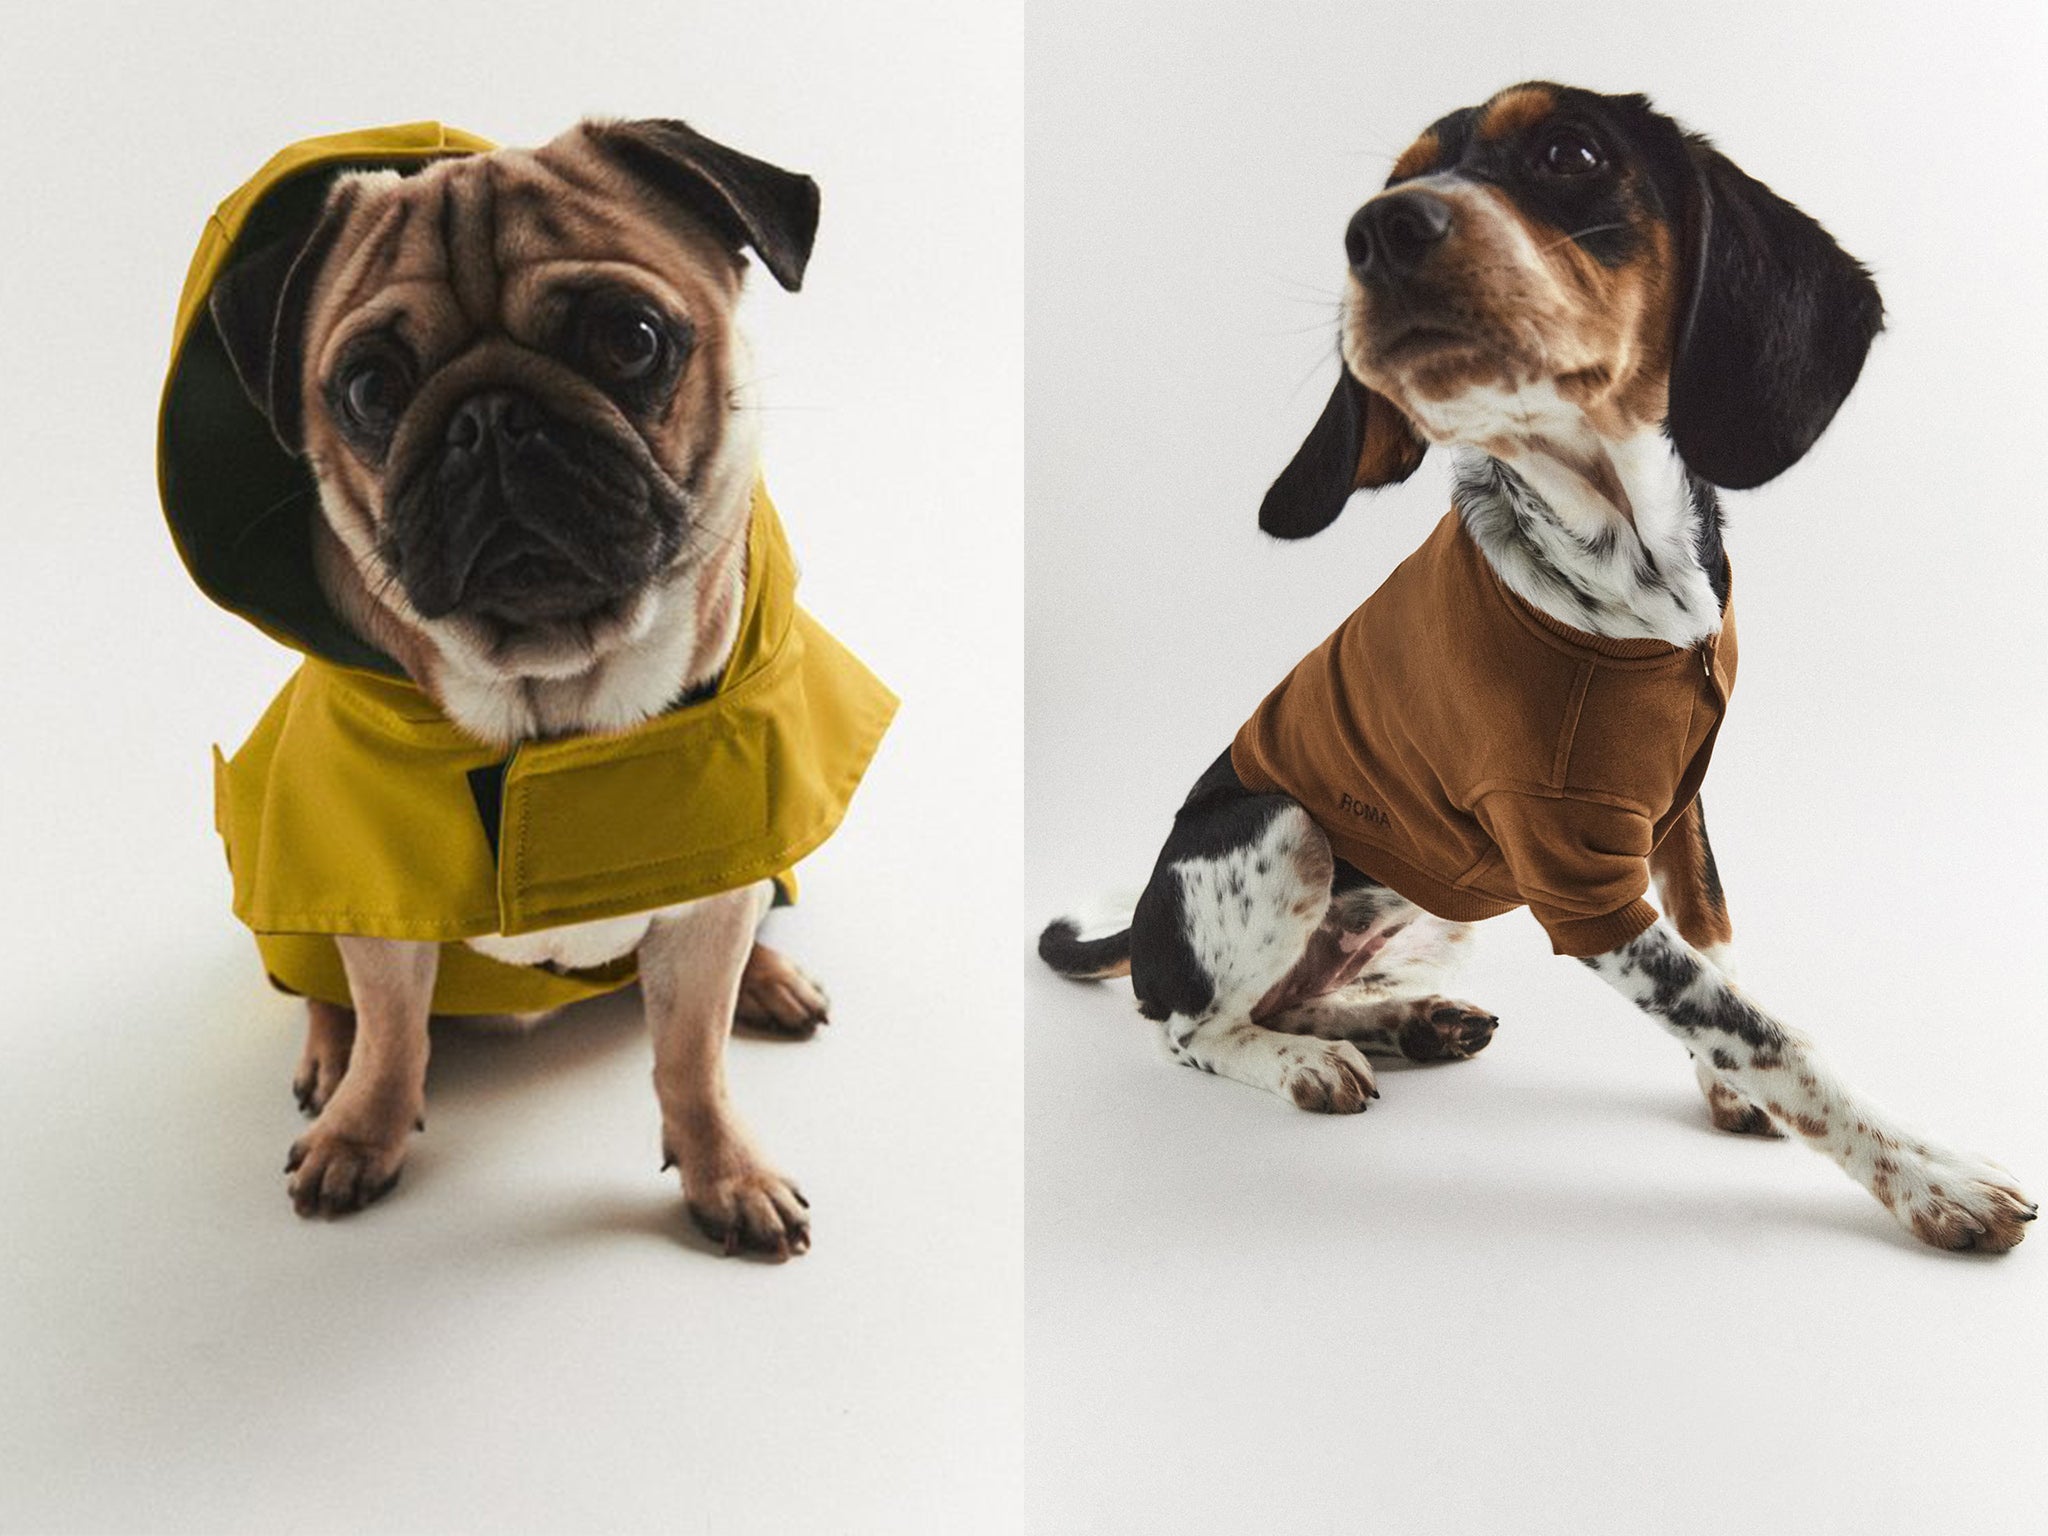 From cosy hoodies to waterproofs, the retailer’s new range has got your pooch covered